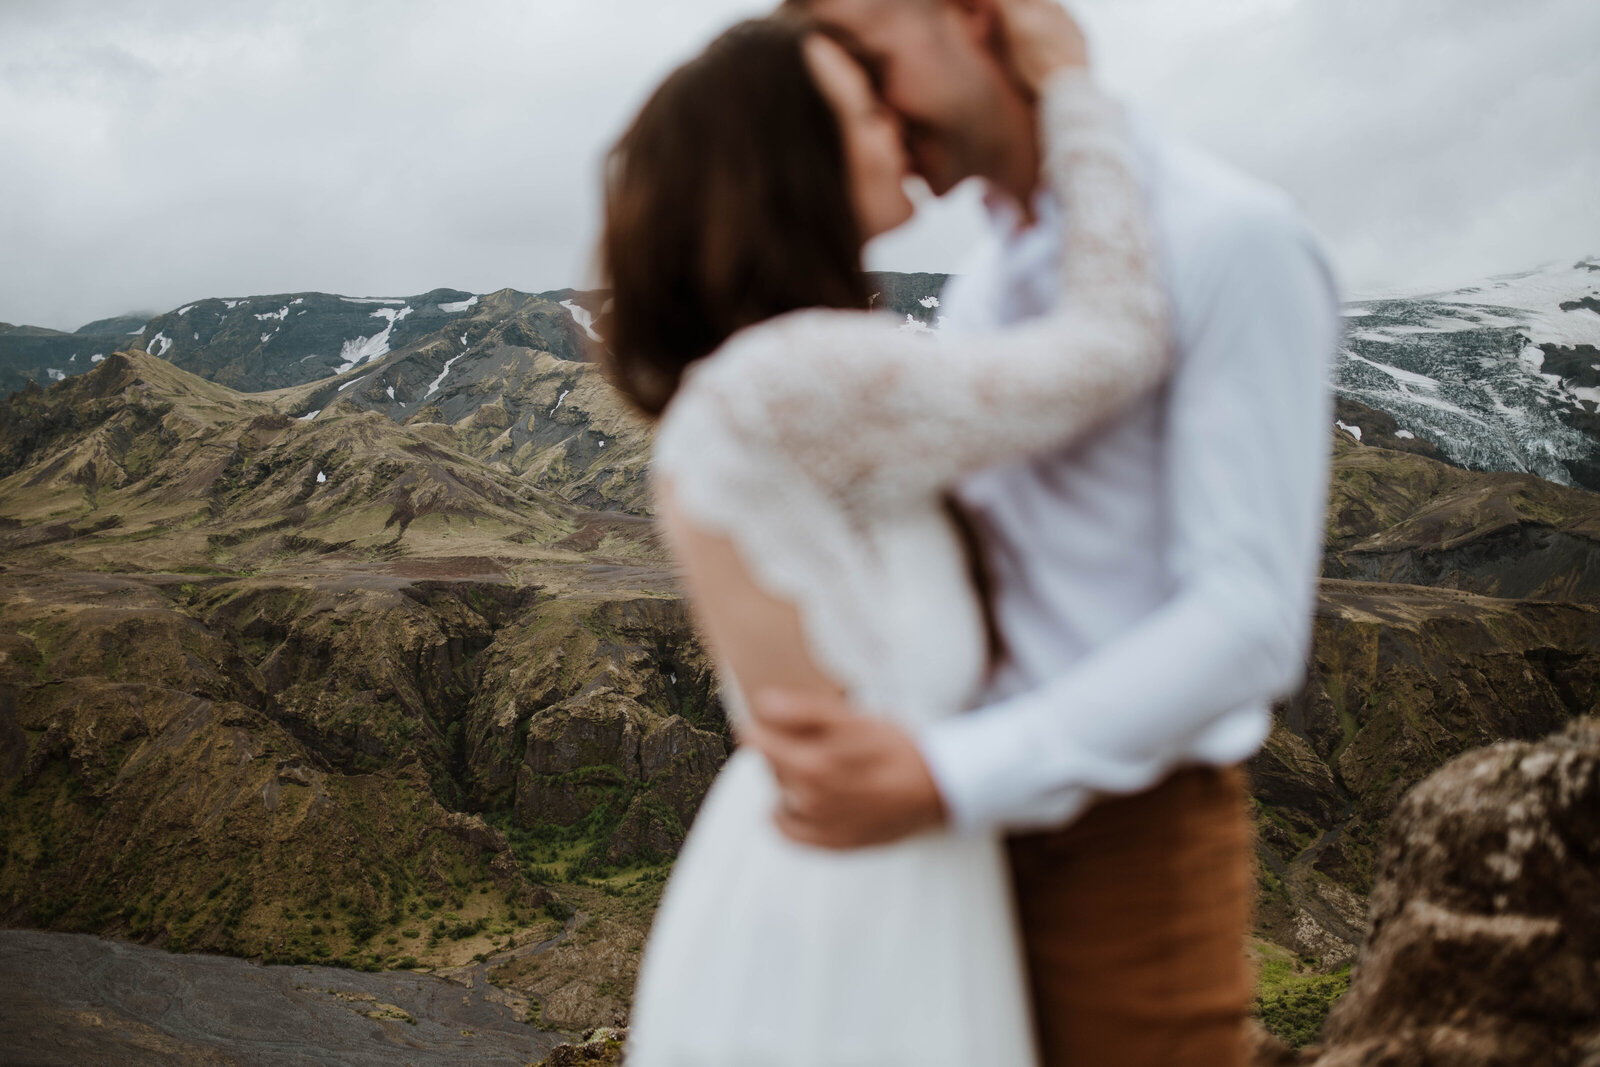 Donna Marie Photo Co. | Iceland Elopement Photographer